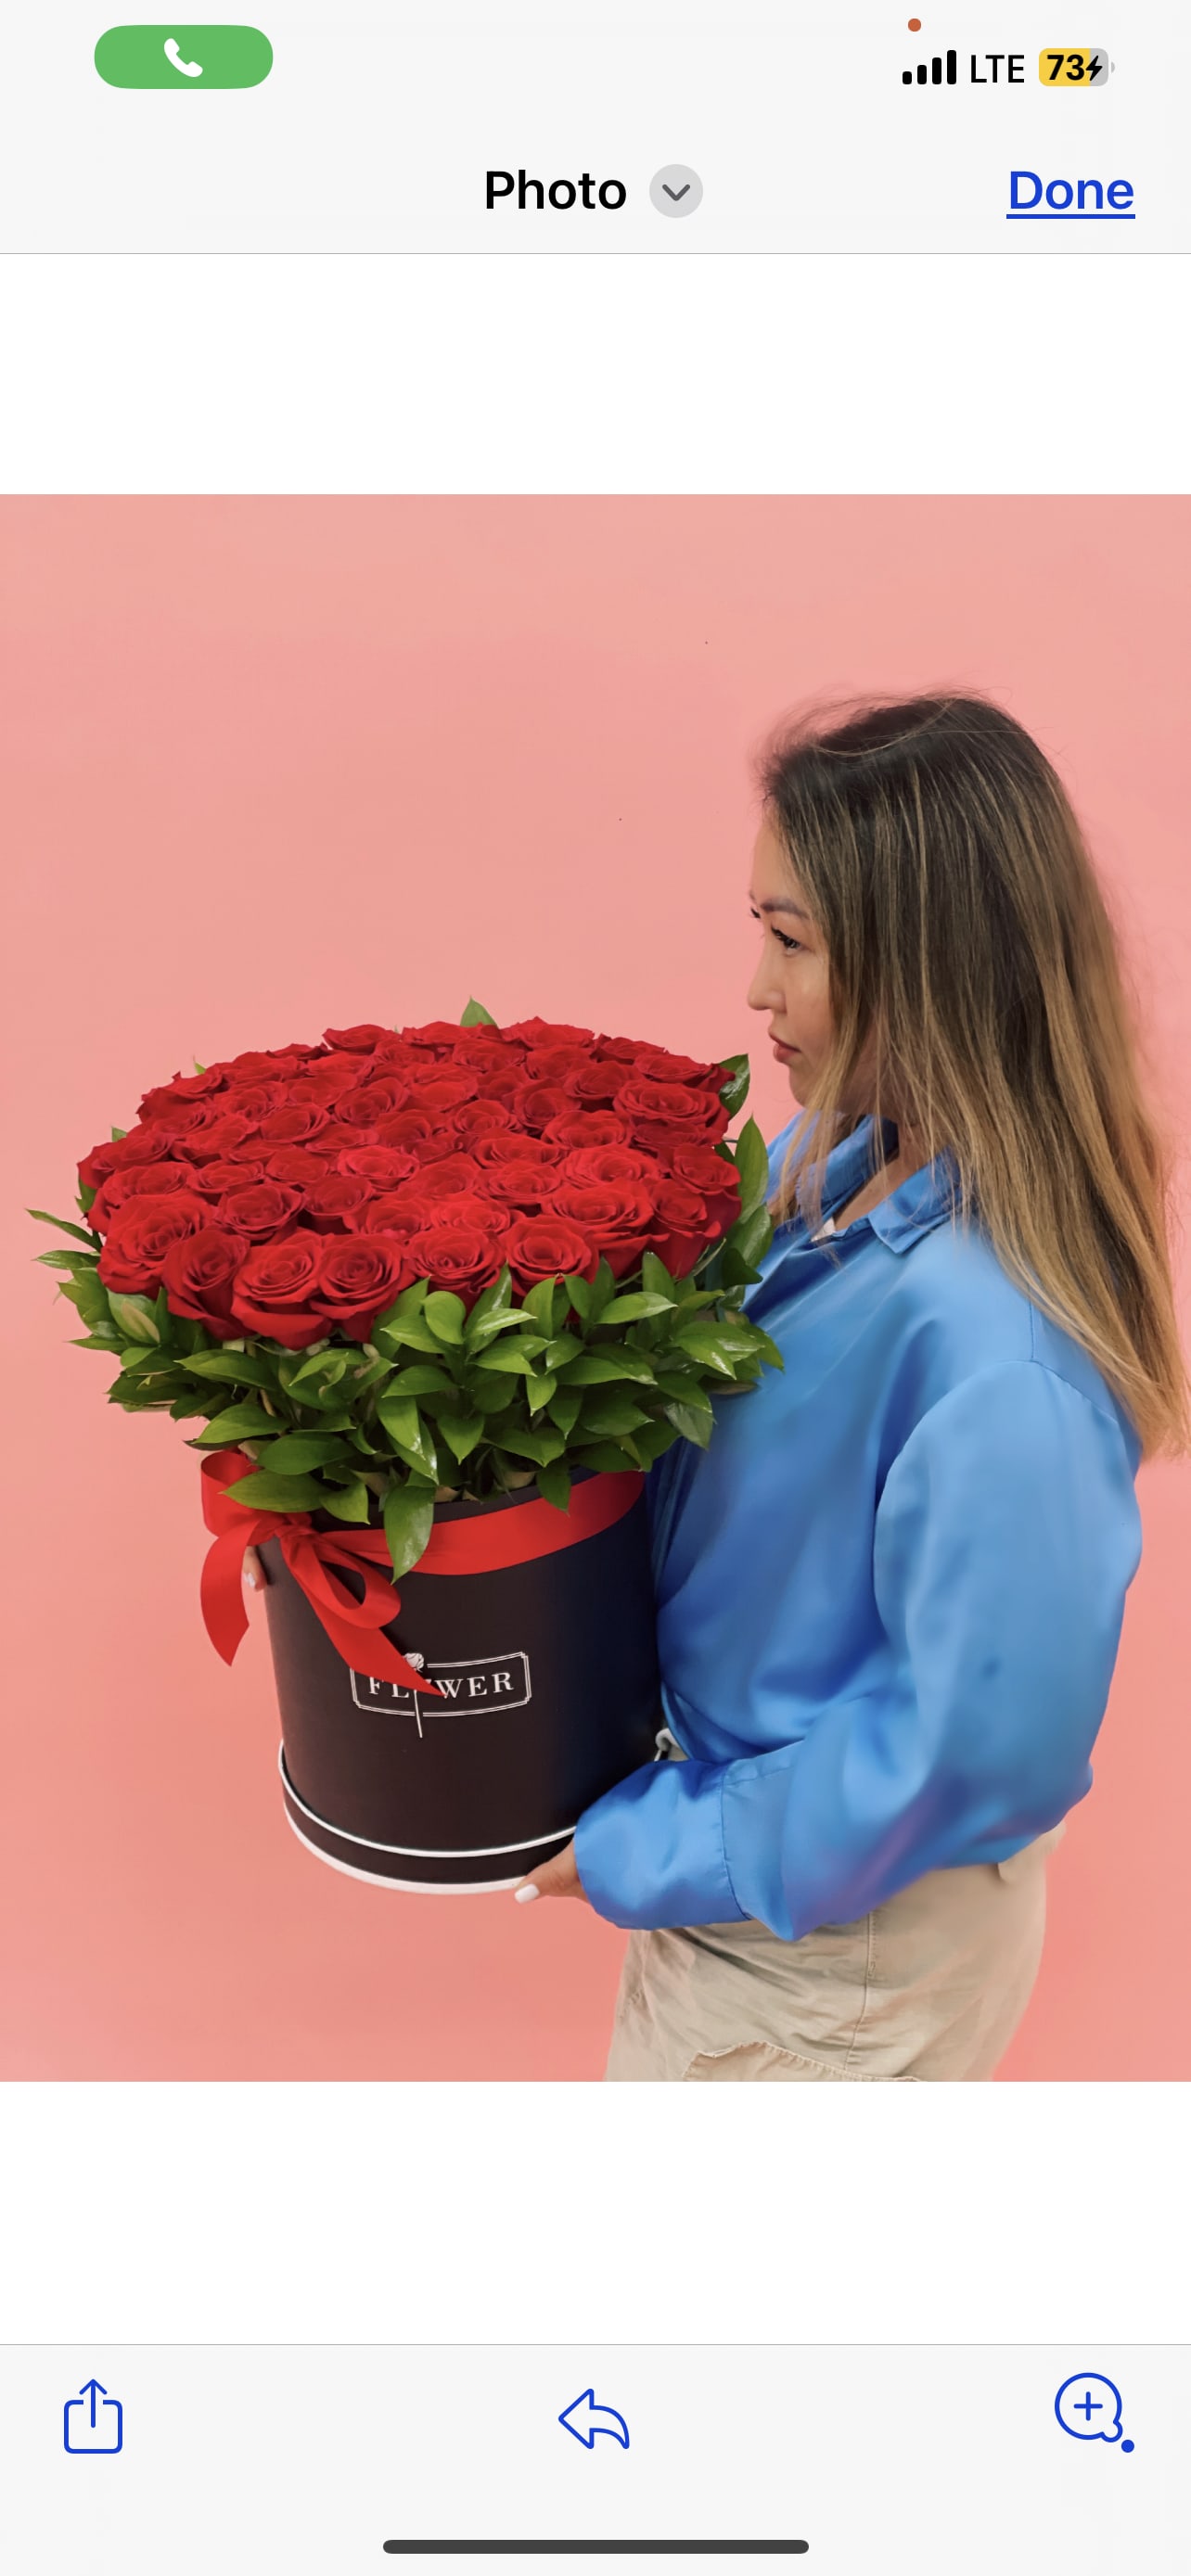 Box of Red Roses - Bouquet will be delivered approximately as pictured.